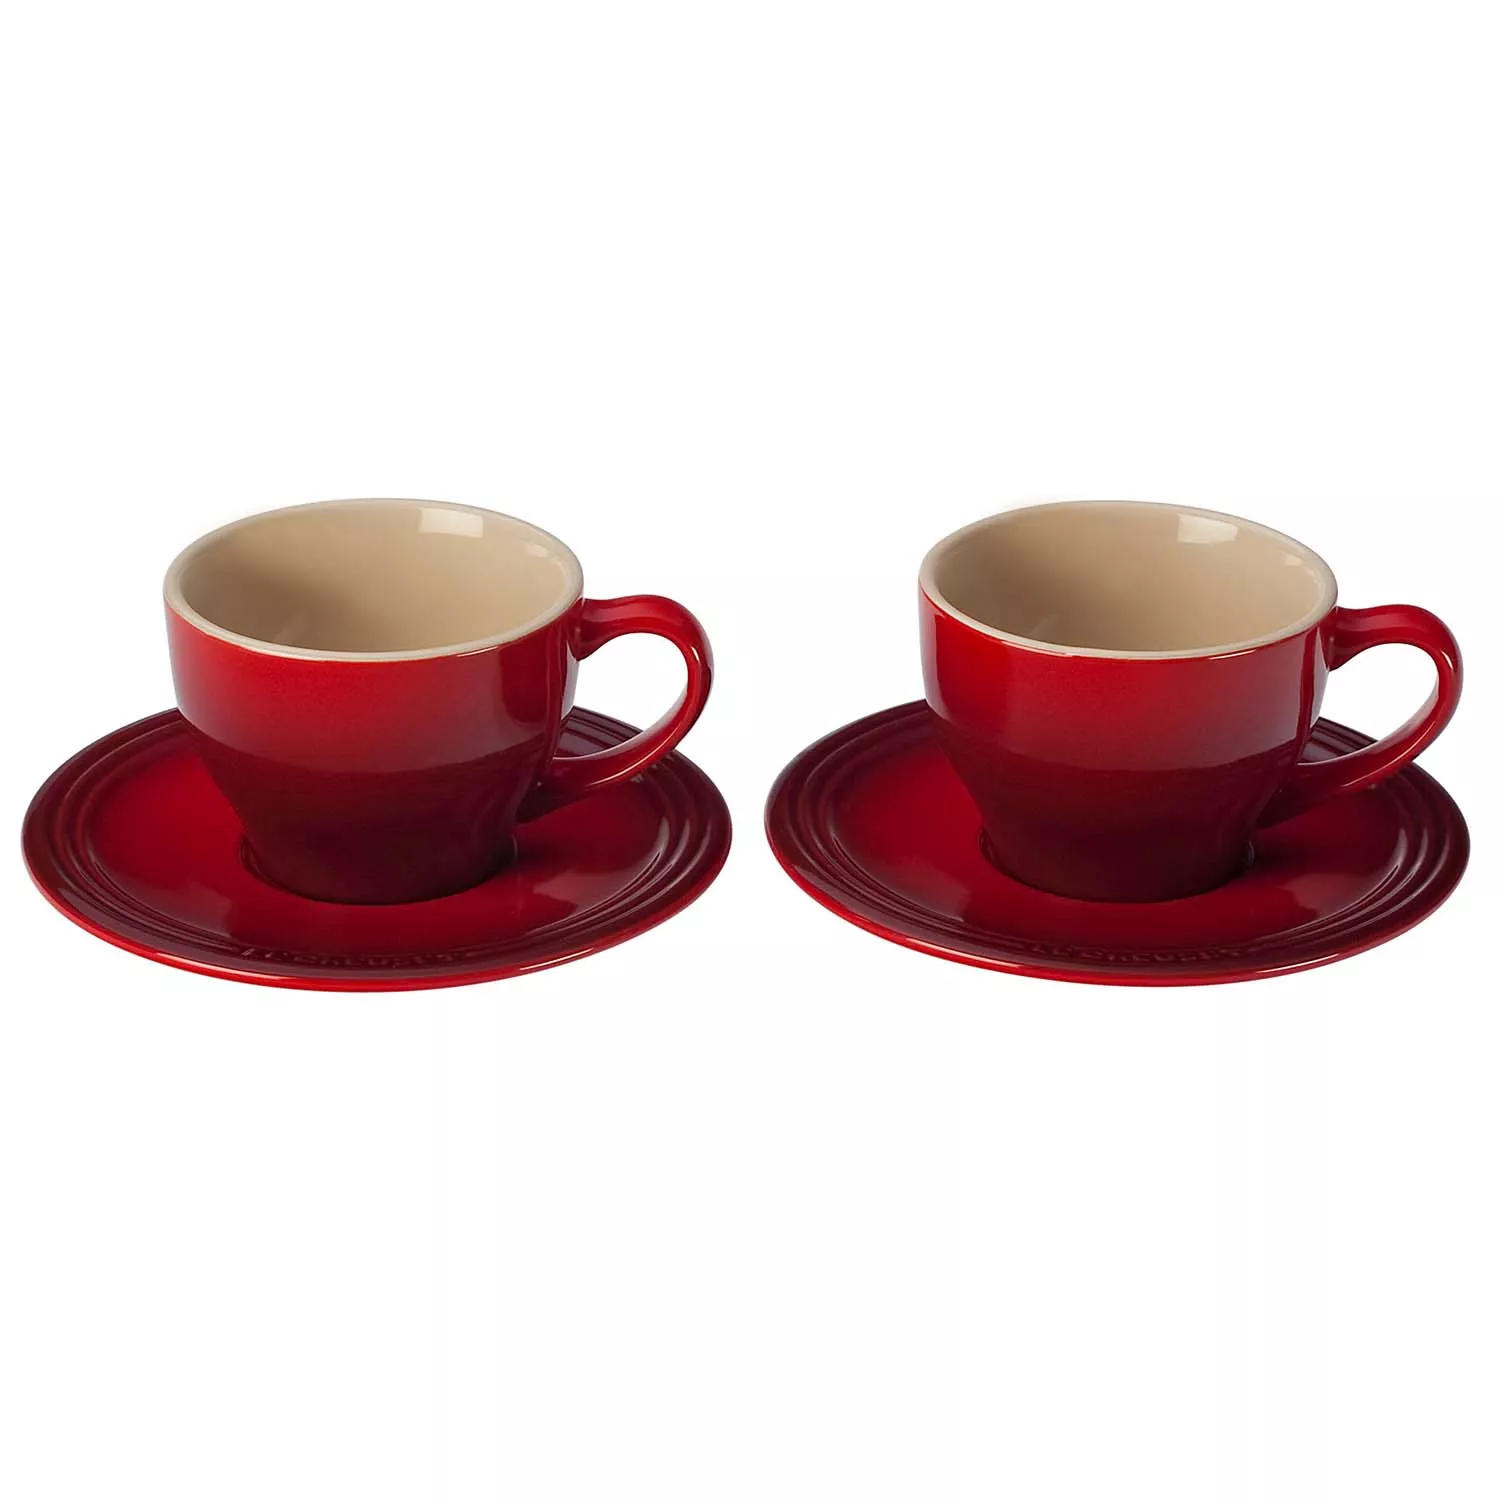 Lazuro Kitchenware - Porcelain Coffee Mug Set of 4 - Cups with Big Handle for Tea, Cappuccino, Latte and Chocolate, Hot or Cold Drinks - 5.3 x 3.5 x